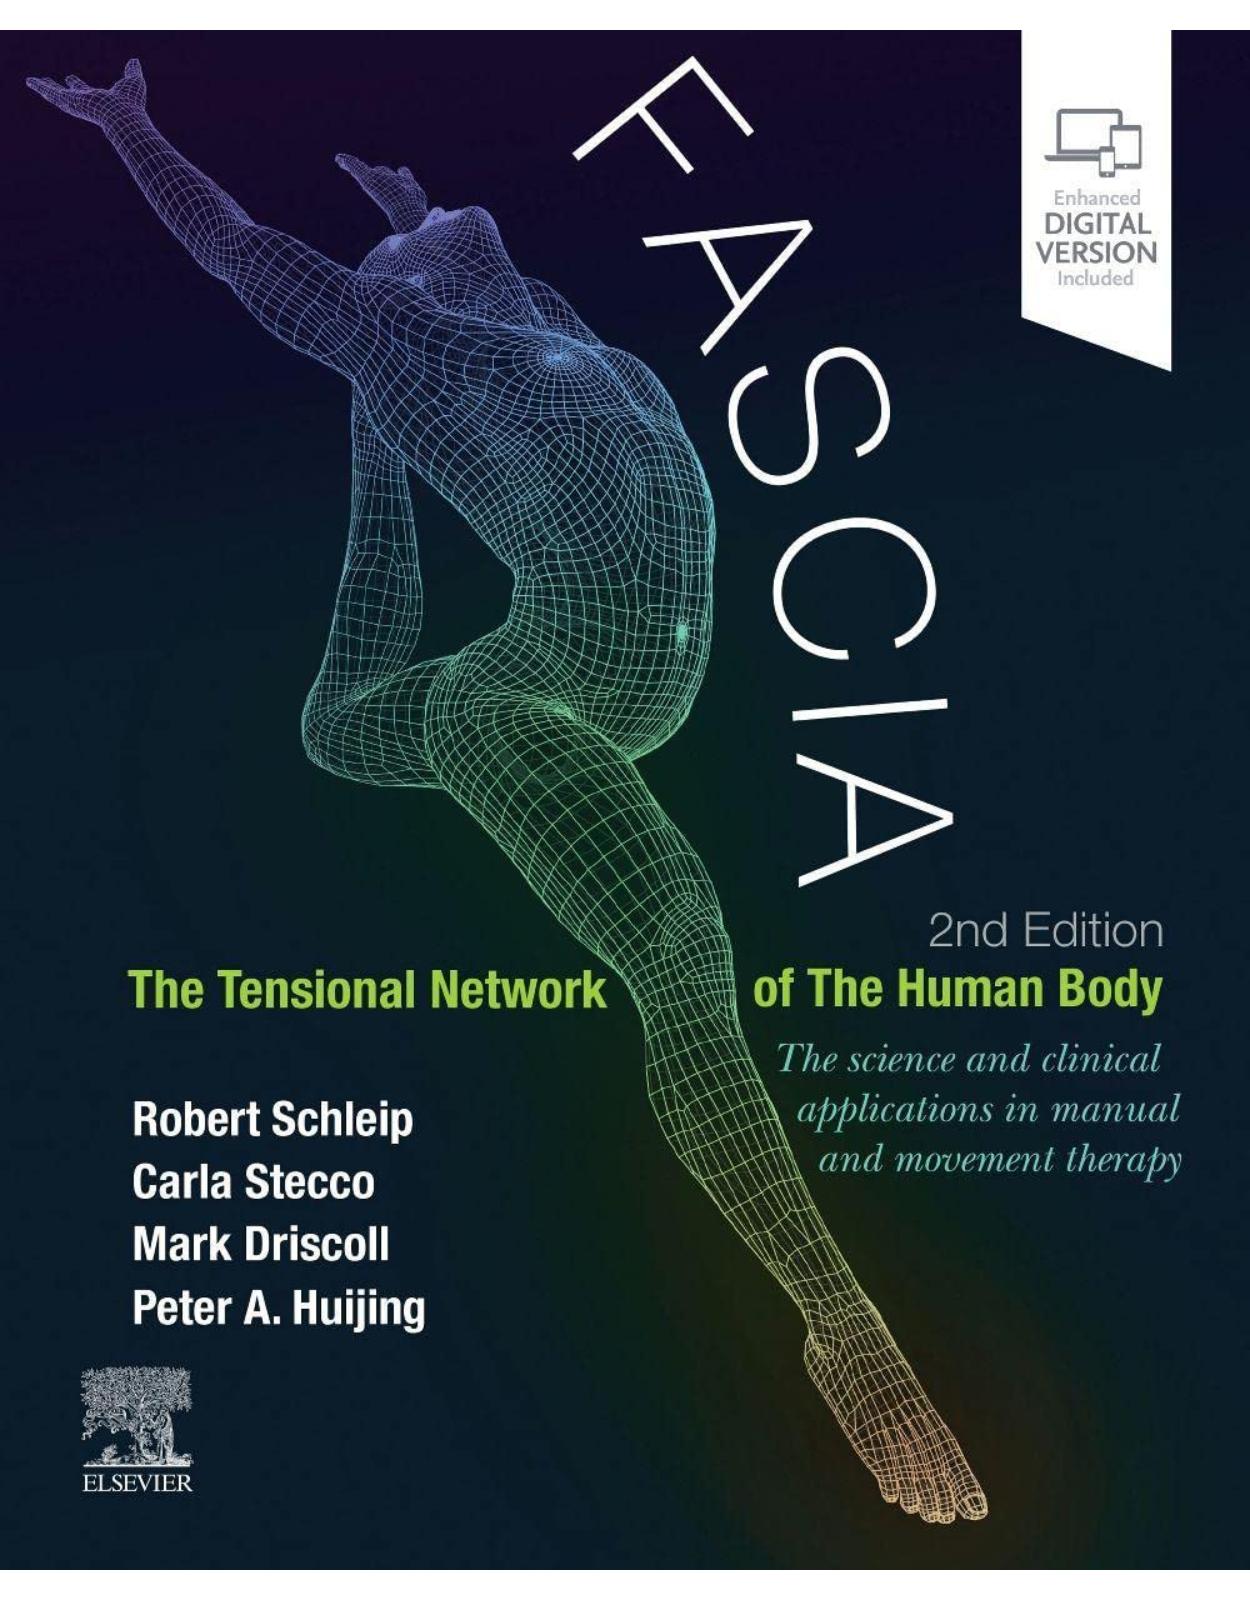 Fascia: The Tensional Network of the Human Body: The science and clinical applications in manual and movement therapy